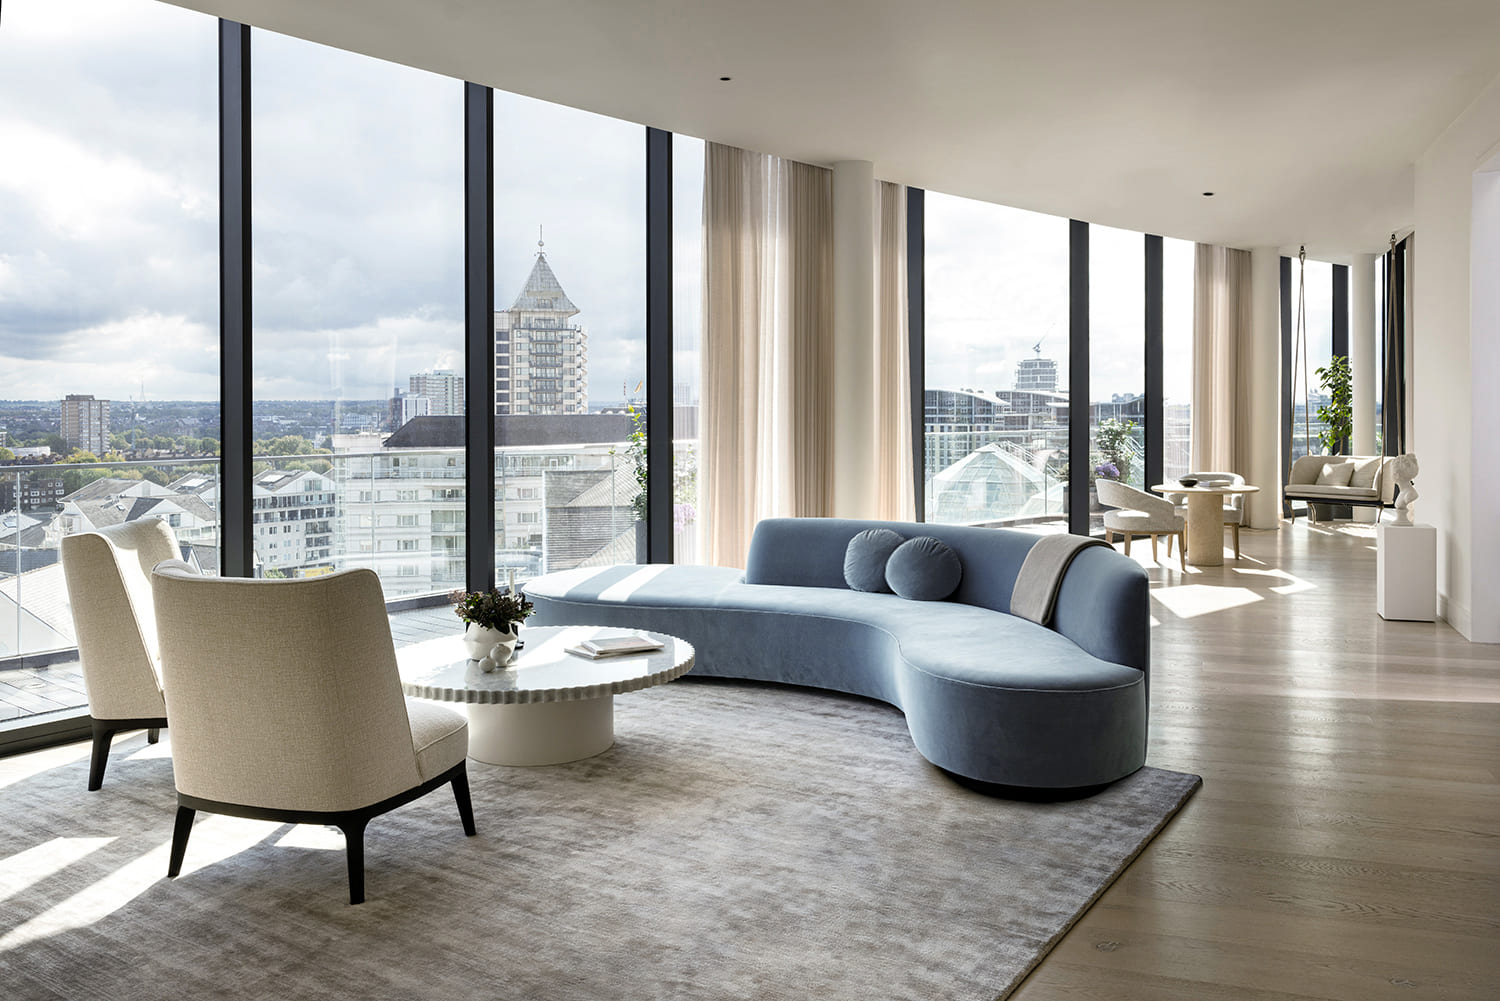 Living area with curved sofa and floor to ceiling windows